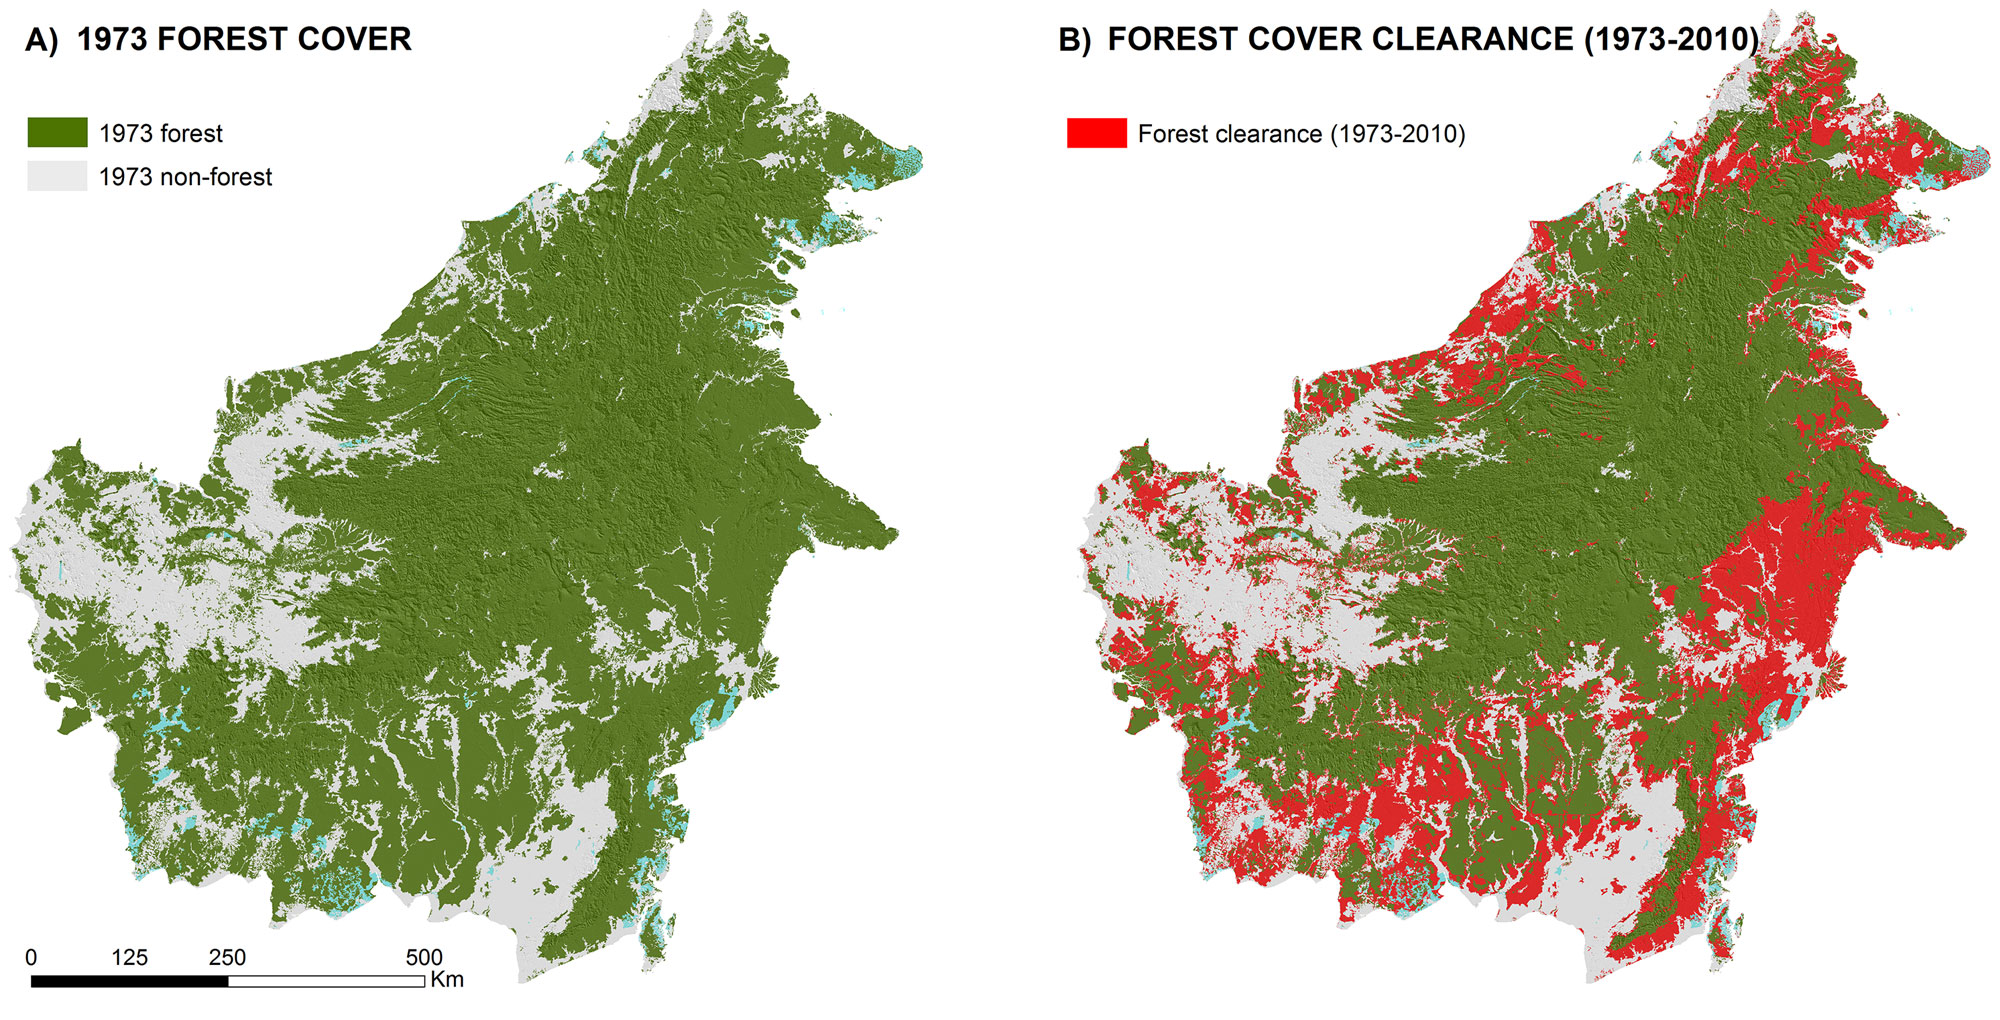 Maps showing forested area of Borneo in 1973 and extent of forest clearance from 1973 to 2010.